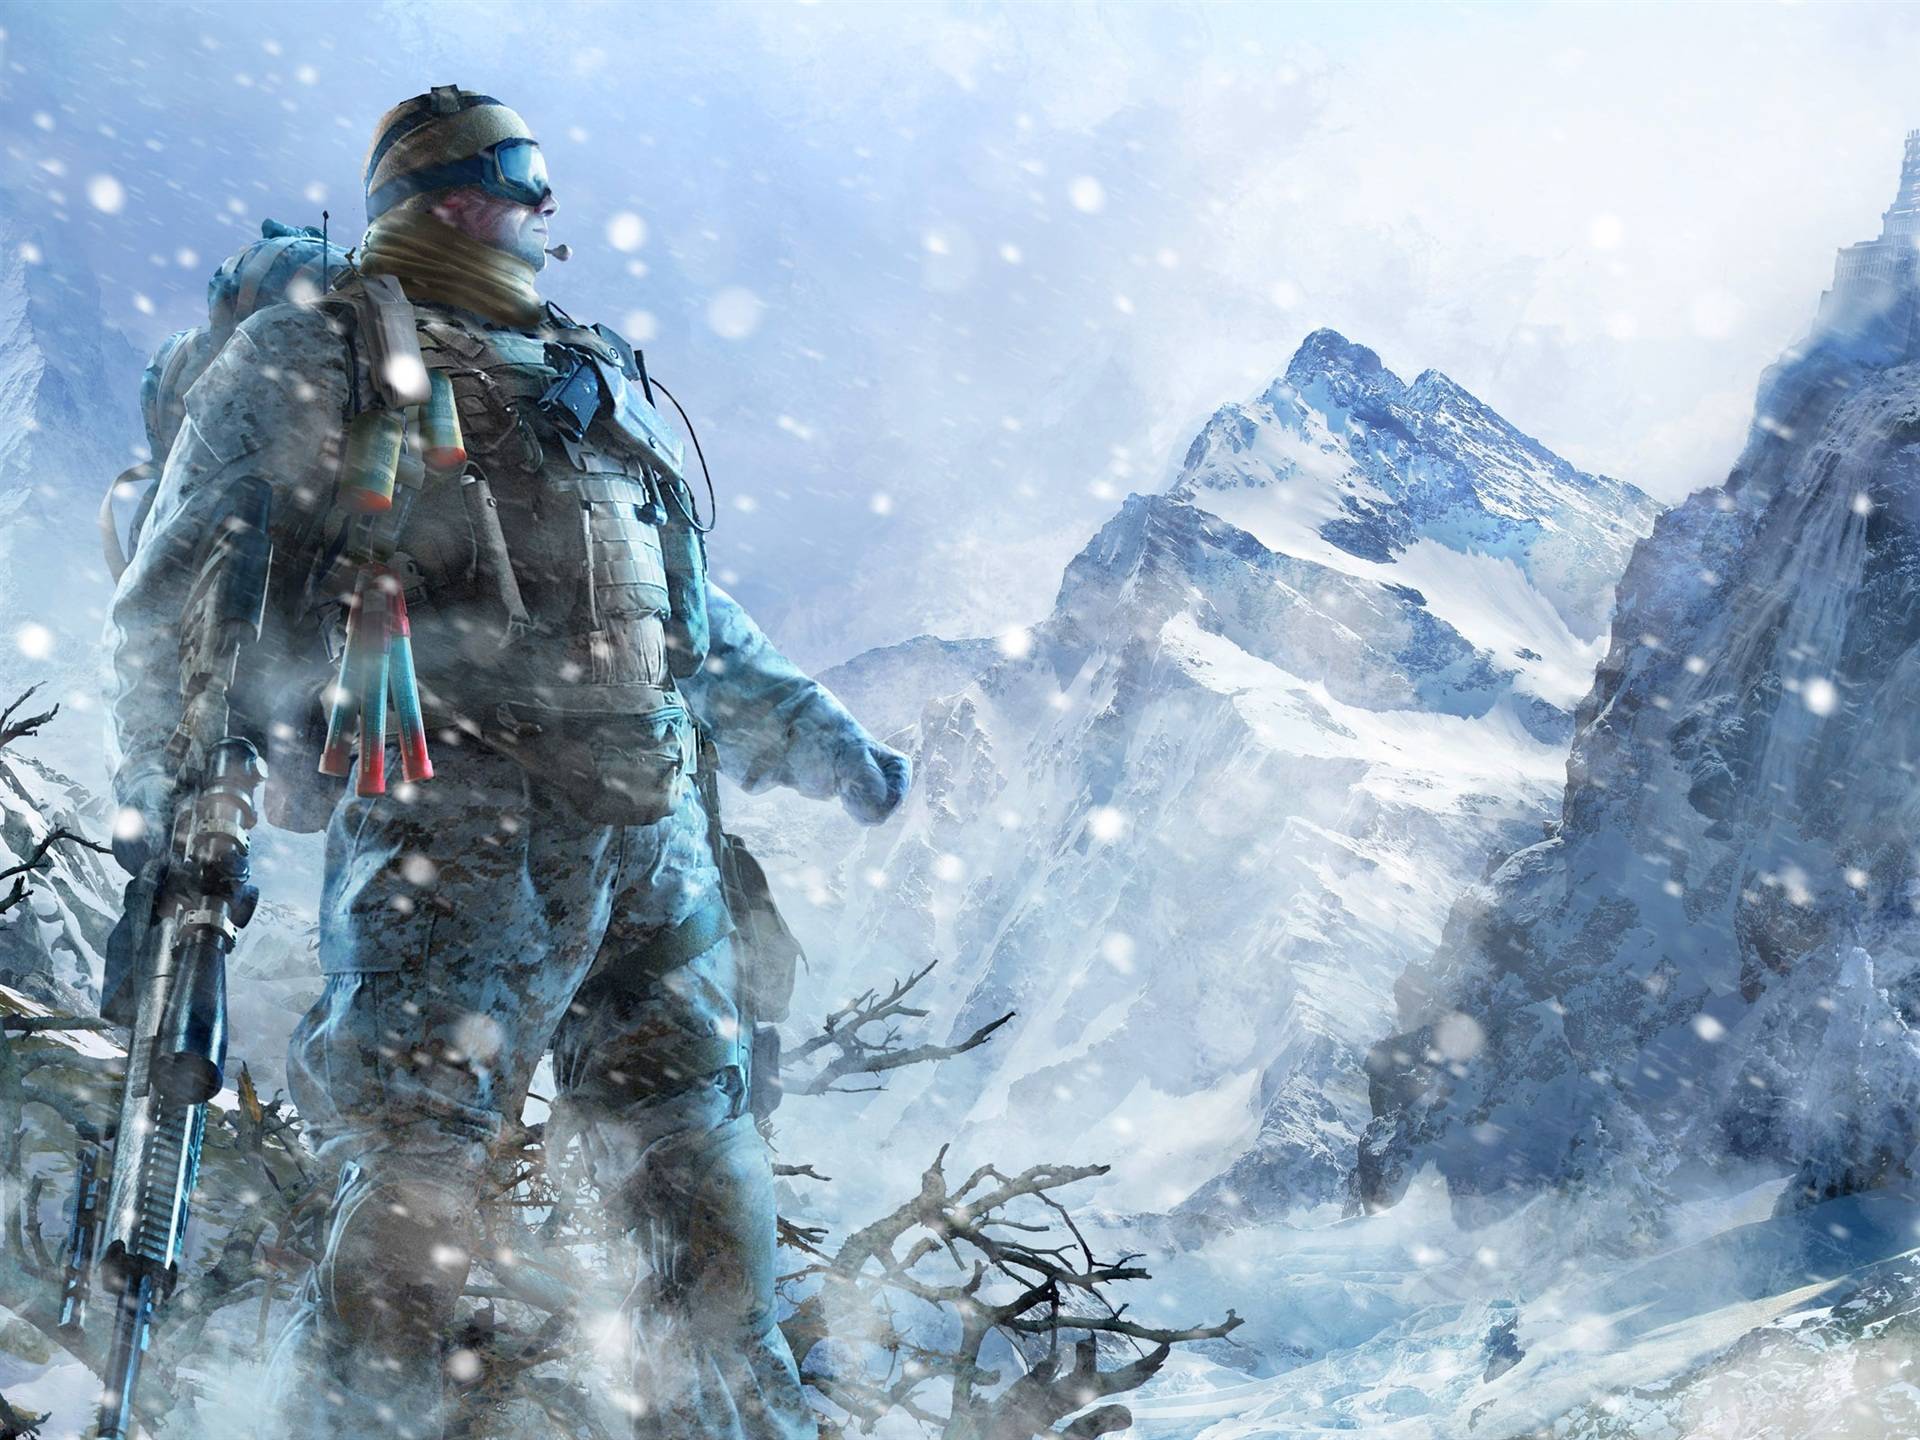 Sniper Ghost Warrior 2 Wallpaper in HD « Video Game News, Reviews